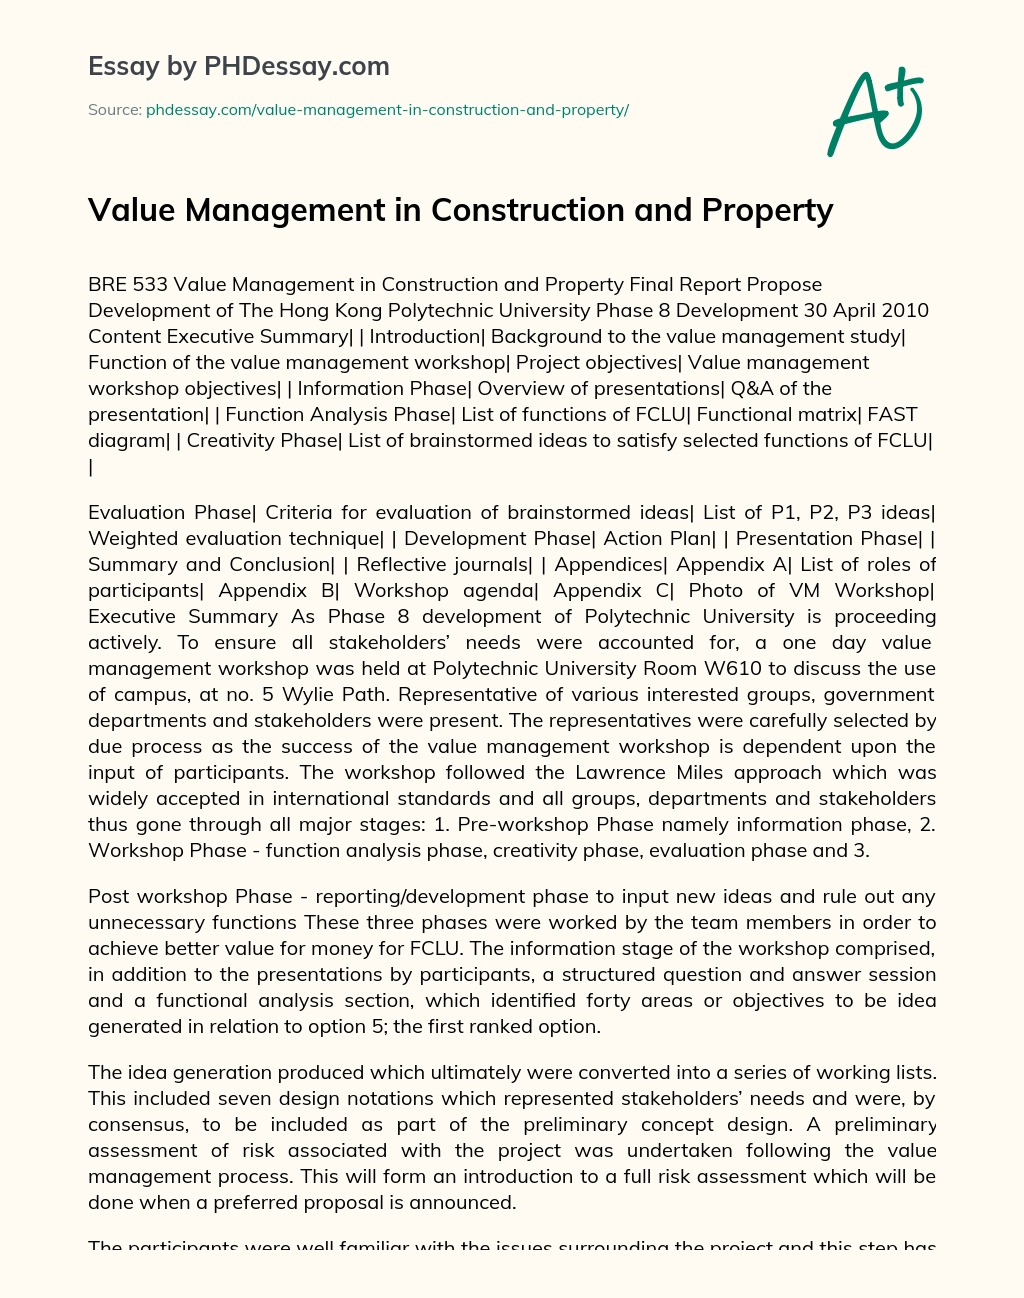 Value Management in Construction and Property essay